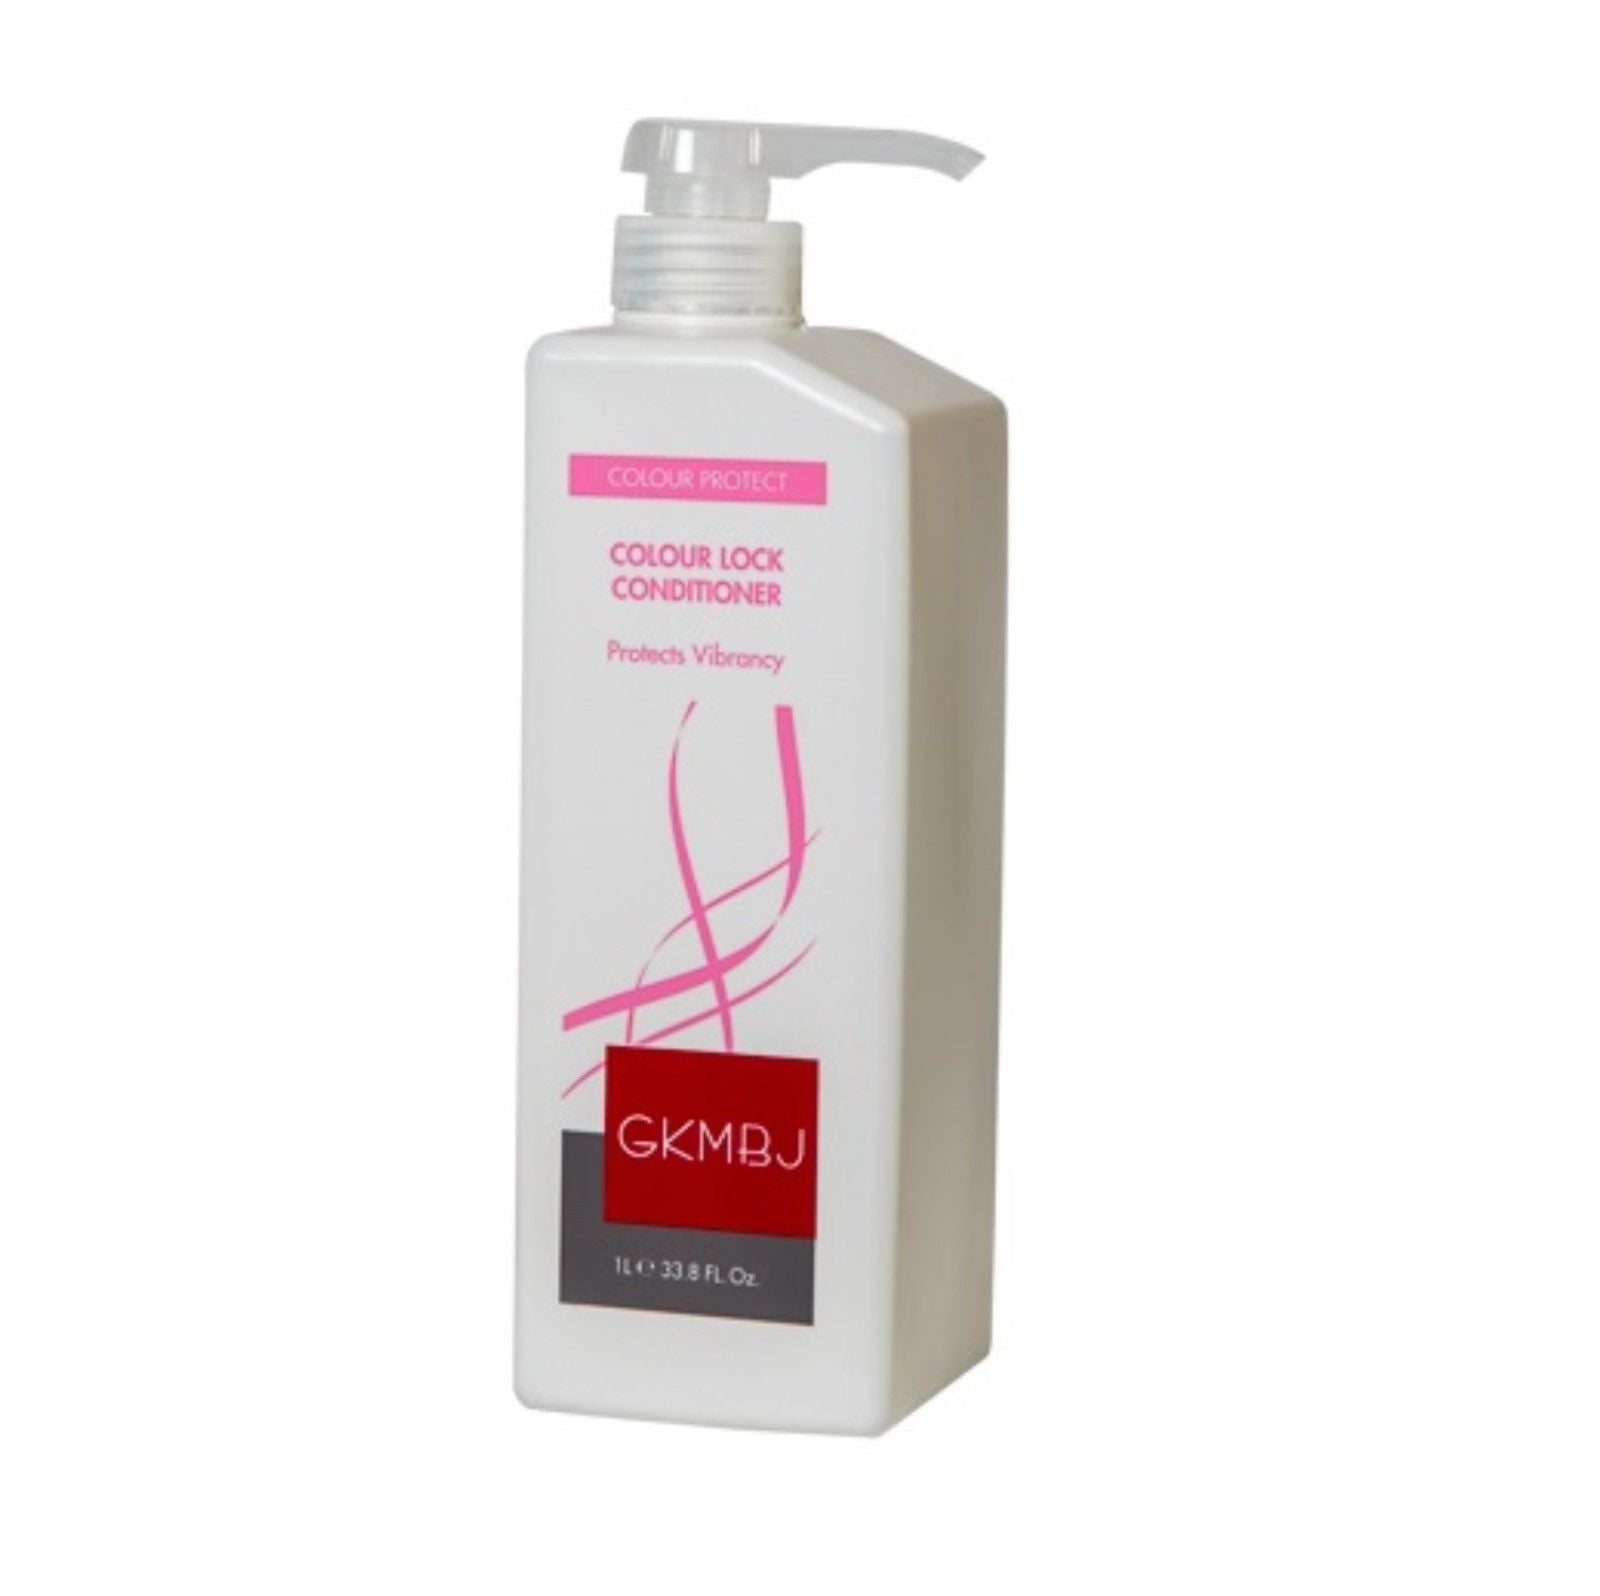 GKMBJ Colour Lock Conditioner 1litre Protects Vibrancy - On Line Hair Depot